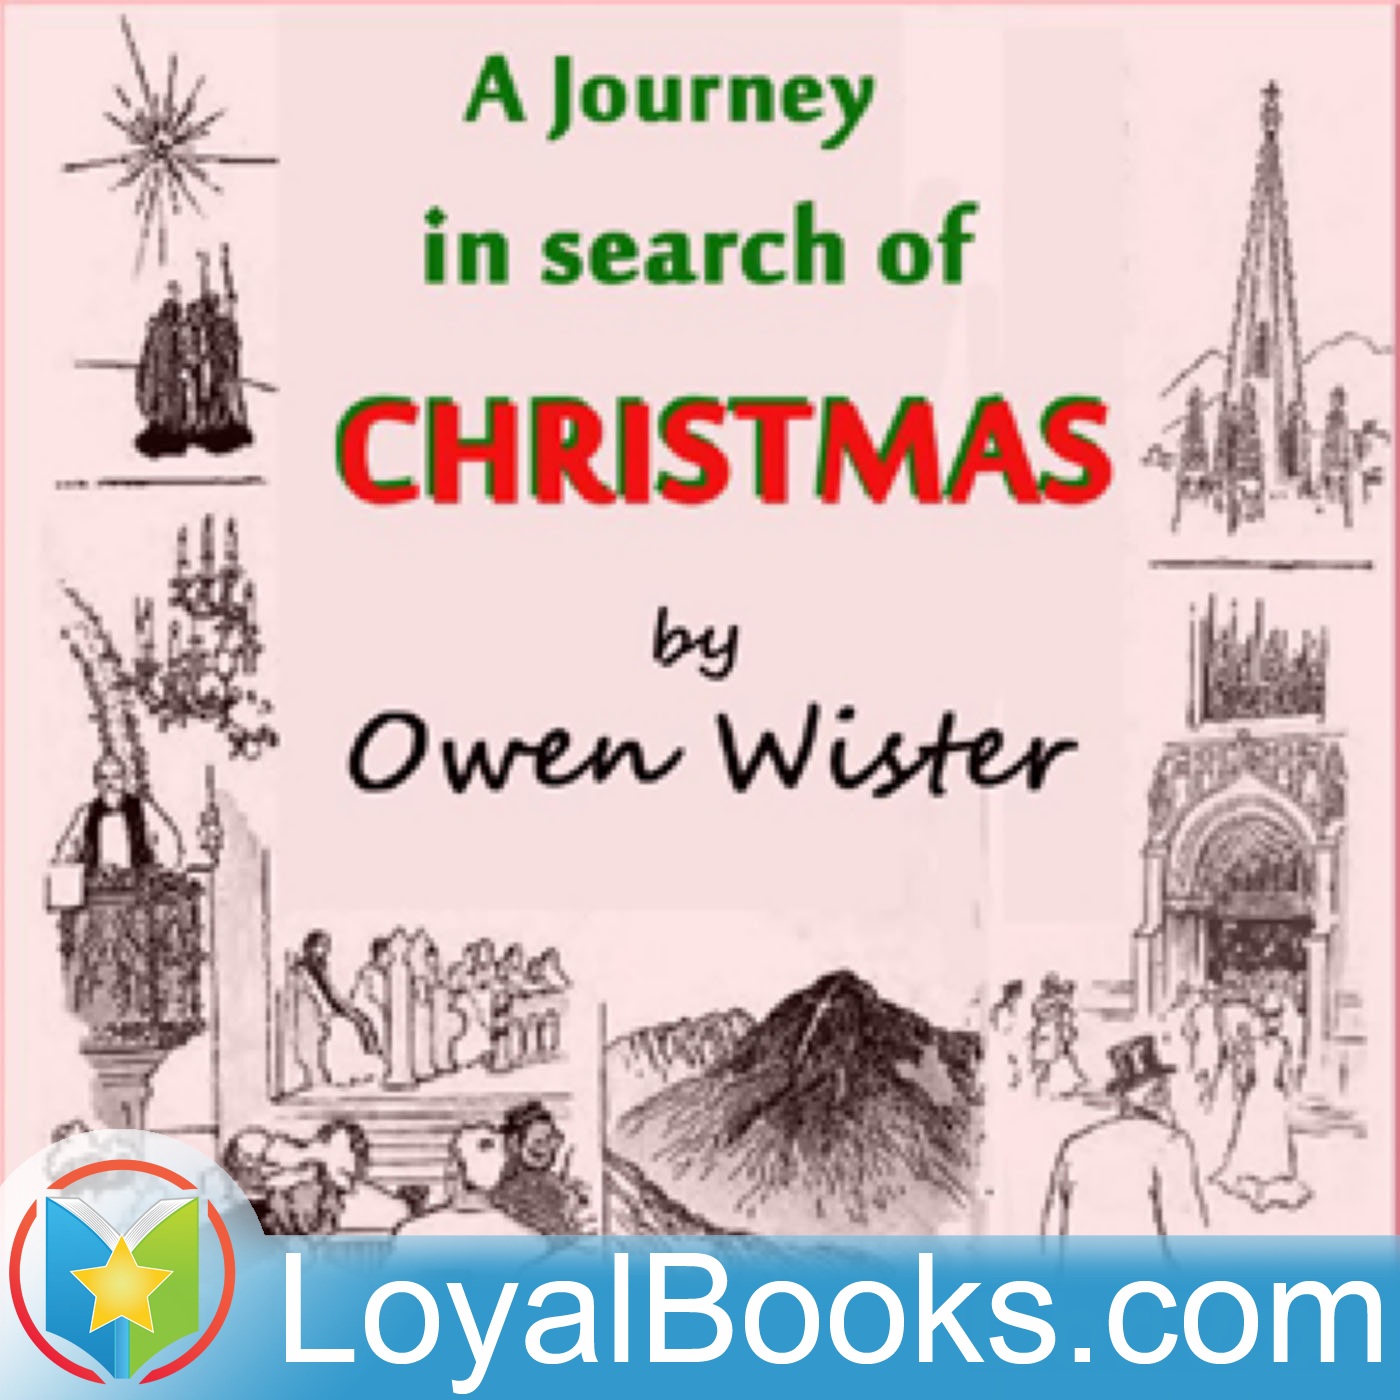 A Journey in Search of Christmas by Owen Wister